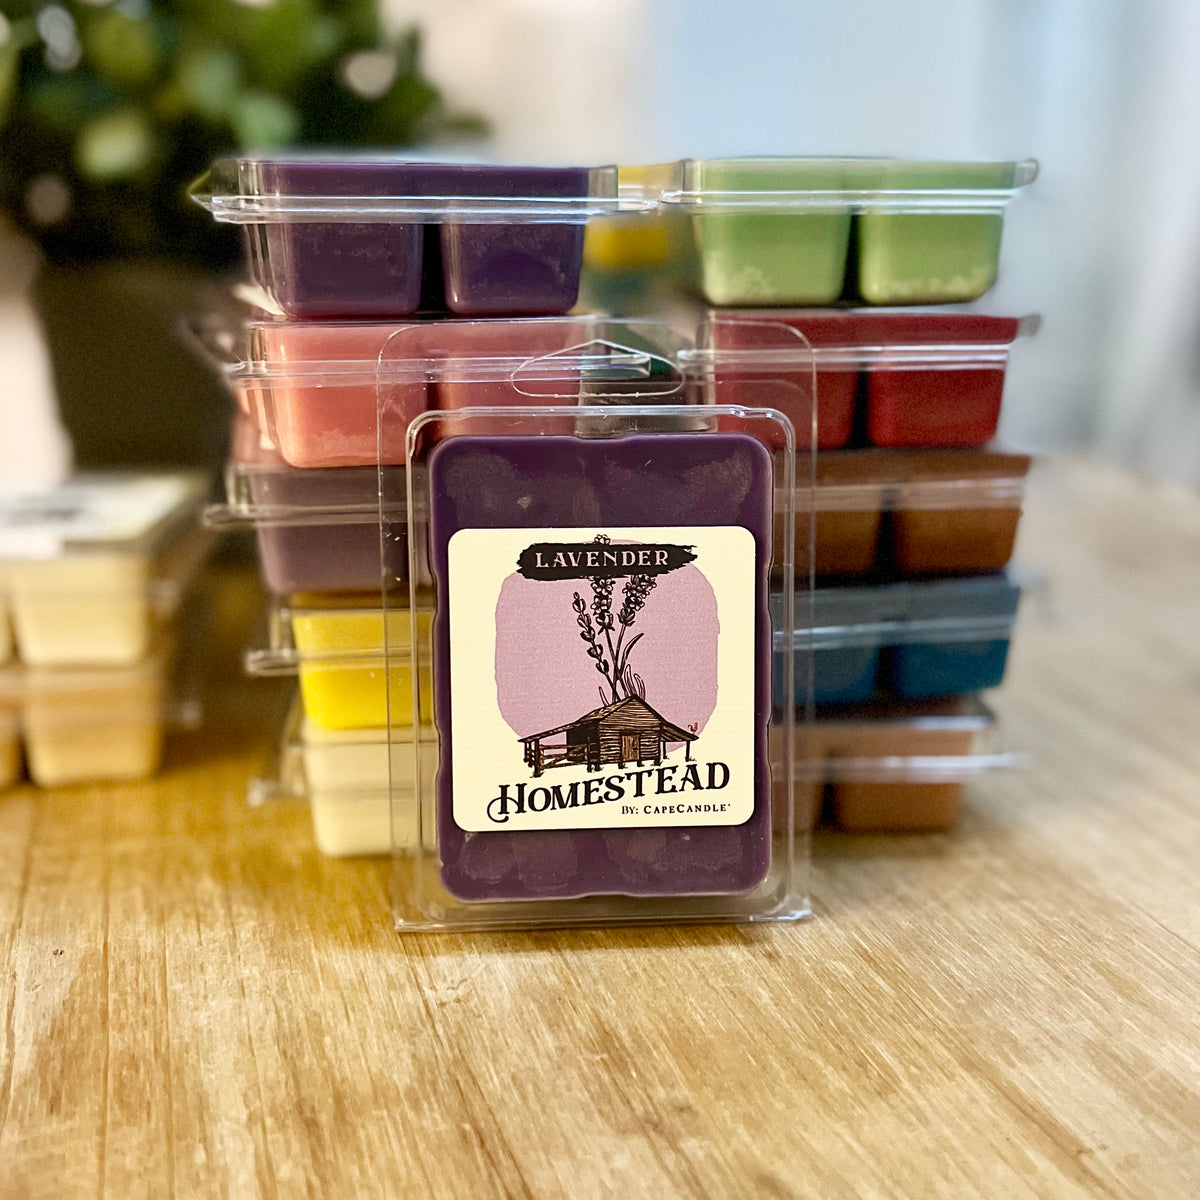 Lavender 3.5oz Homestead Soy Wax Melts by Cape Candle